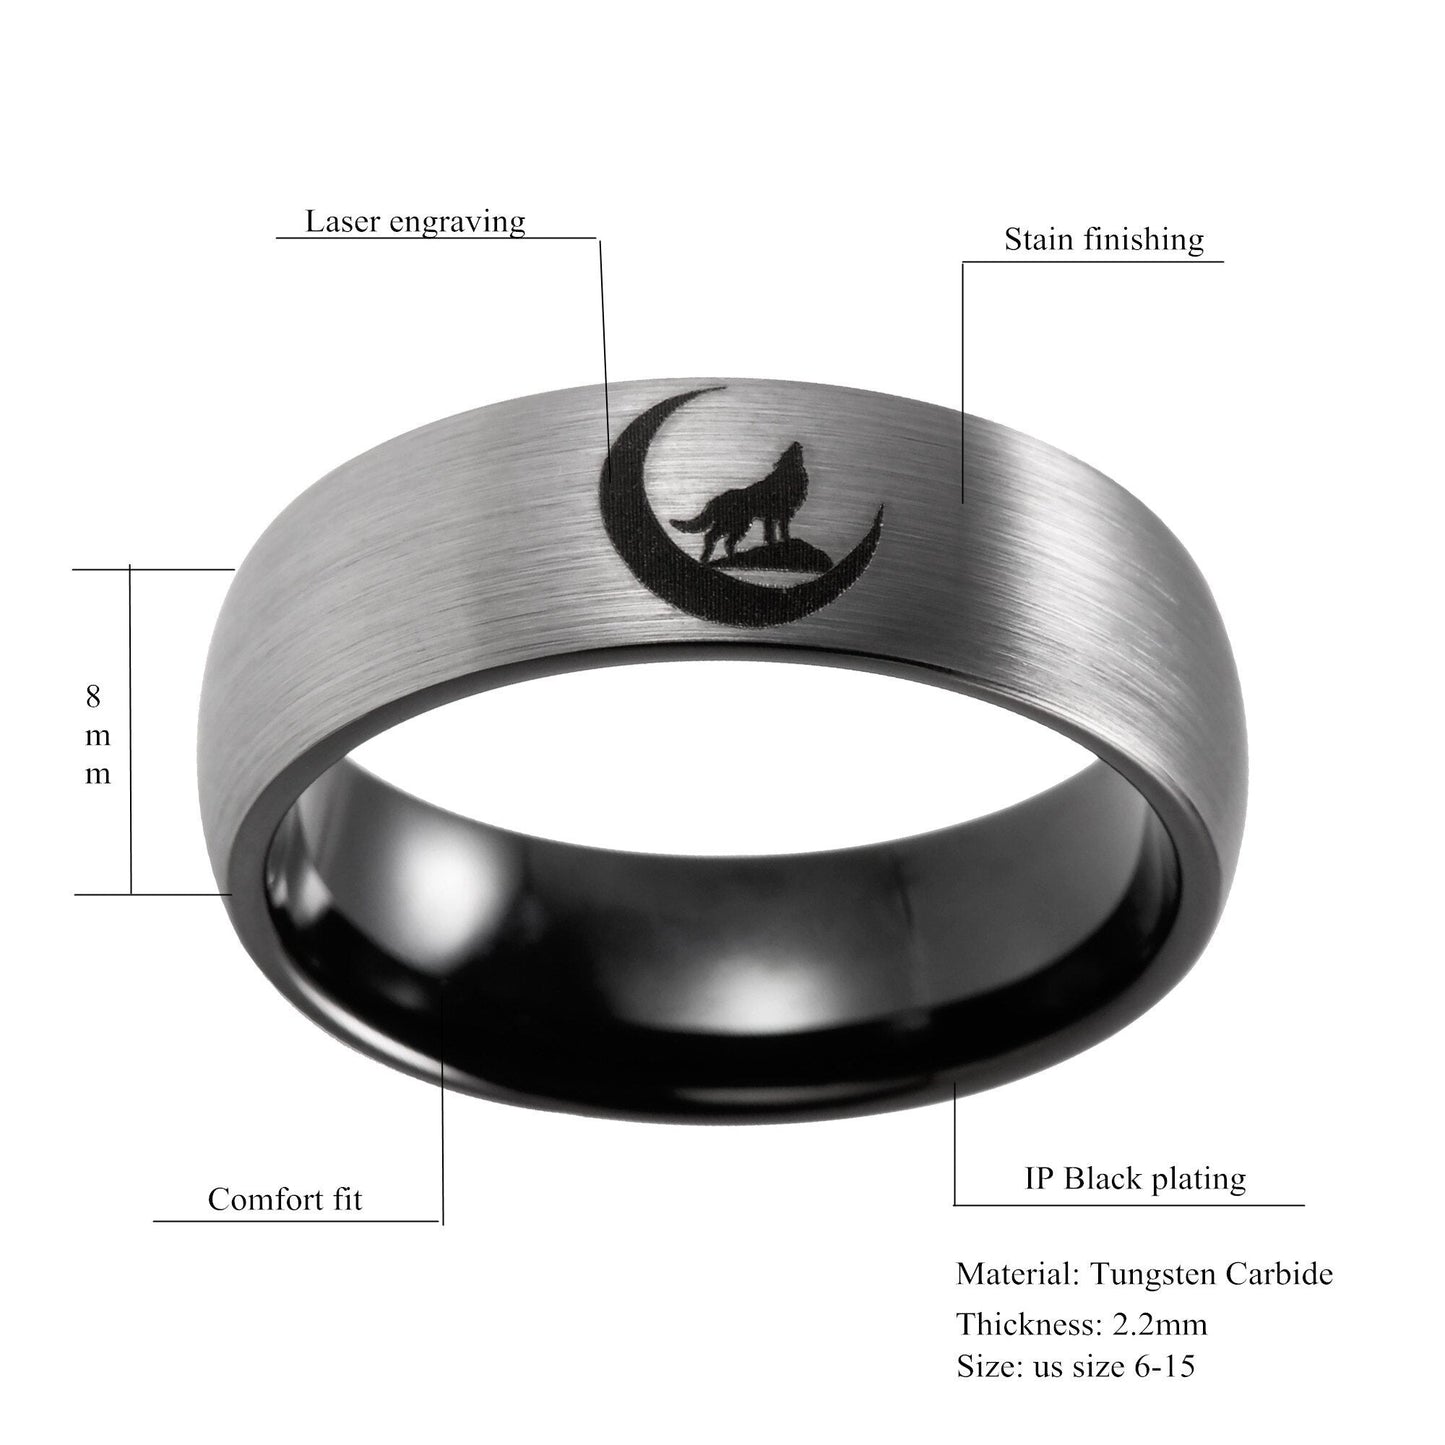 8mm Howling Wolf & Moon Outdoors Tungsten Unisex Ring